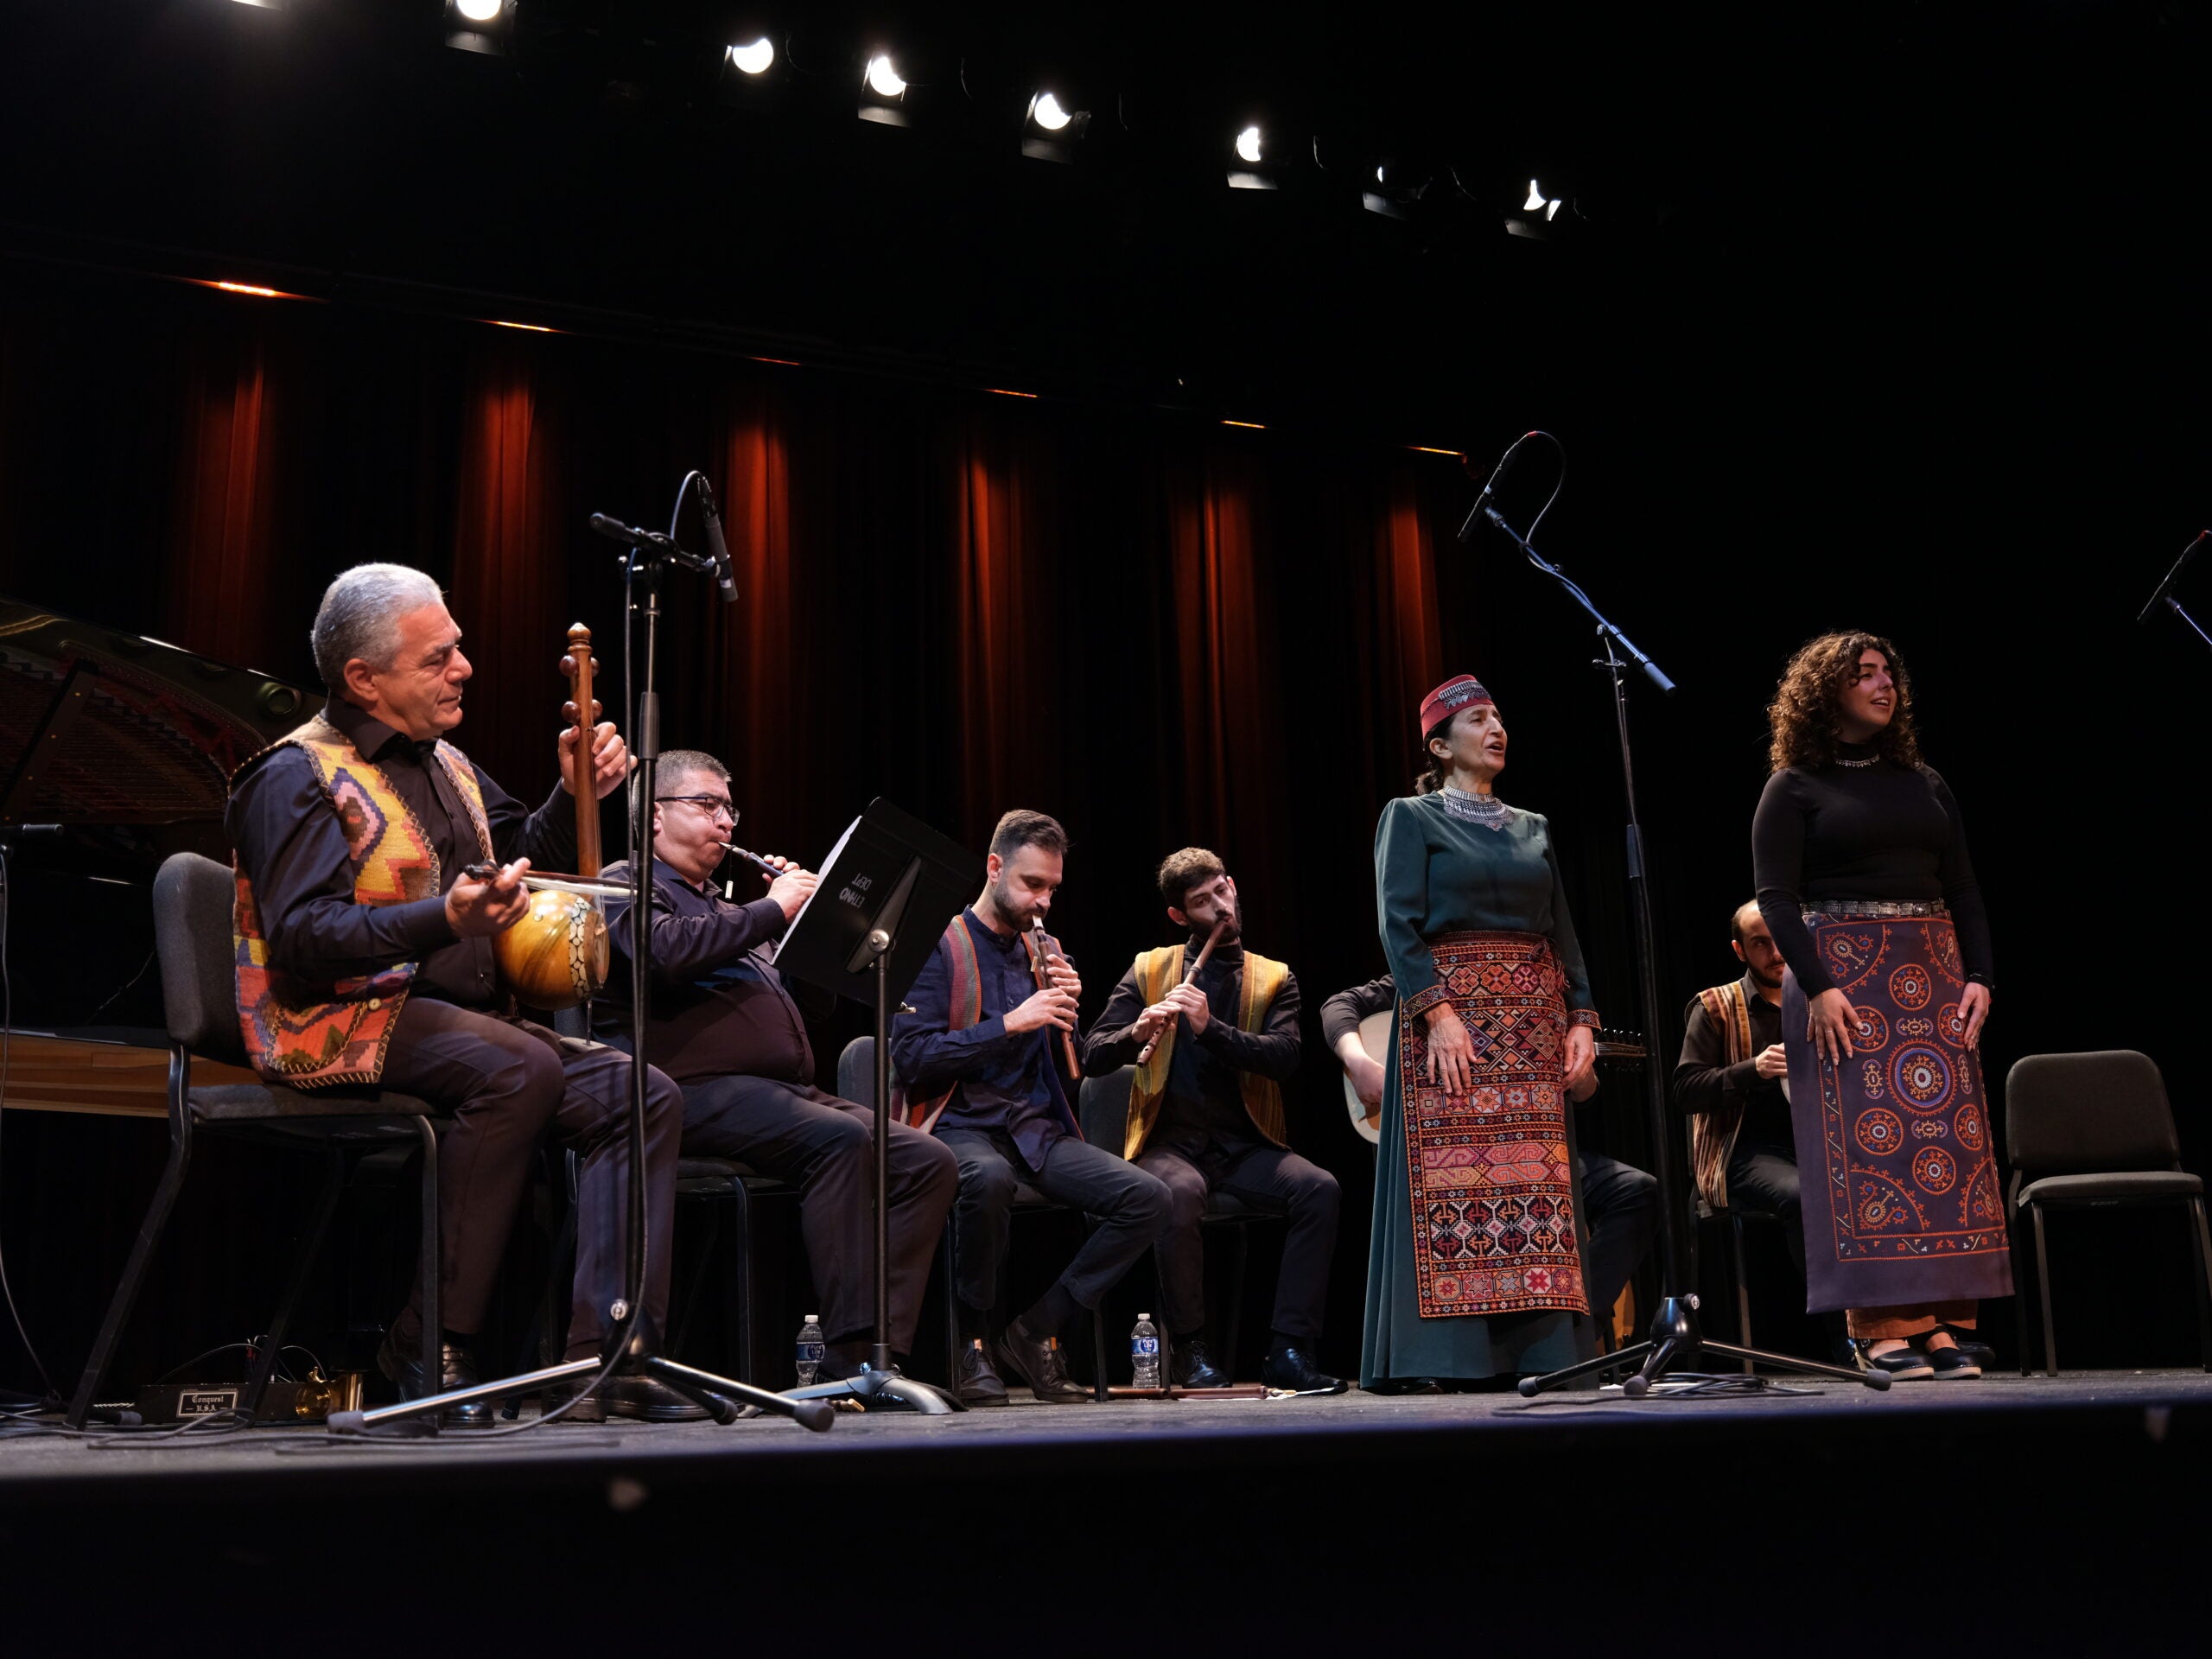 A group of Armenian folk ensemble musicians performing on stage, dressed in vibrant traditional costumes featuring patterned vests and aprons. The musicians are seated in a half circle, with various traditional instruments such as the kamancha, duduk, blul, oud, and dhol being played. In the center, there are two vocalists singing.